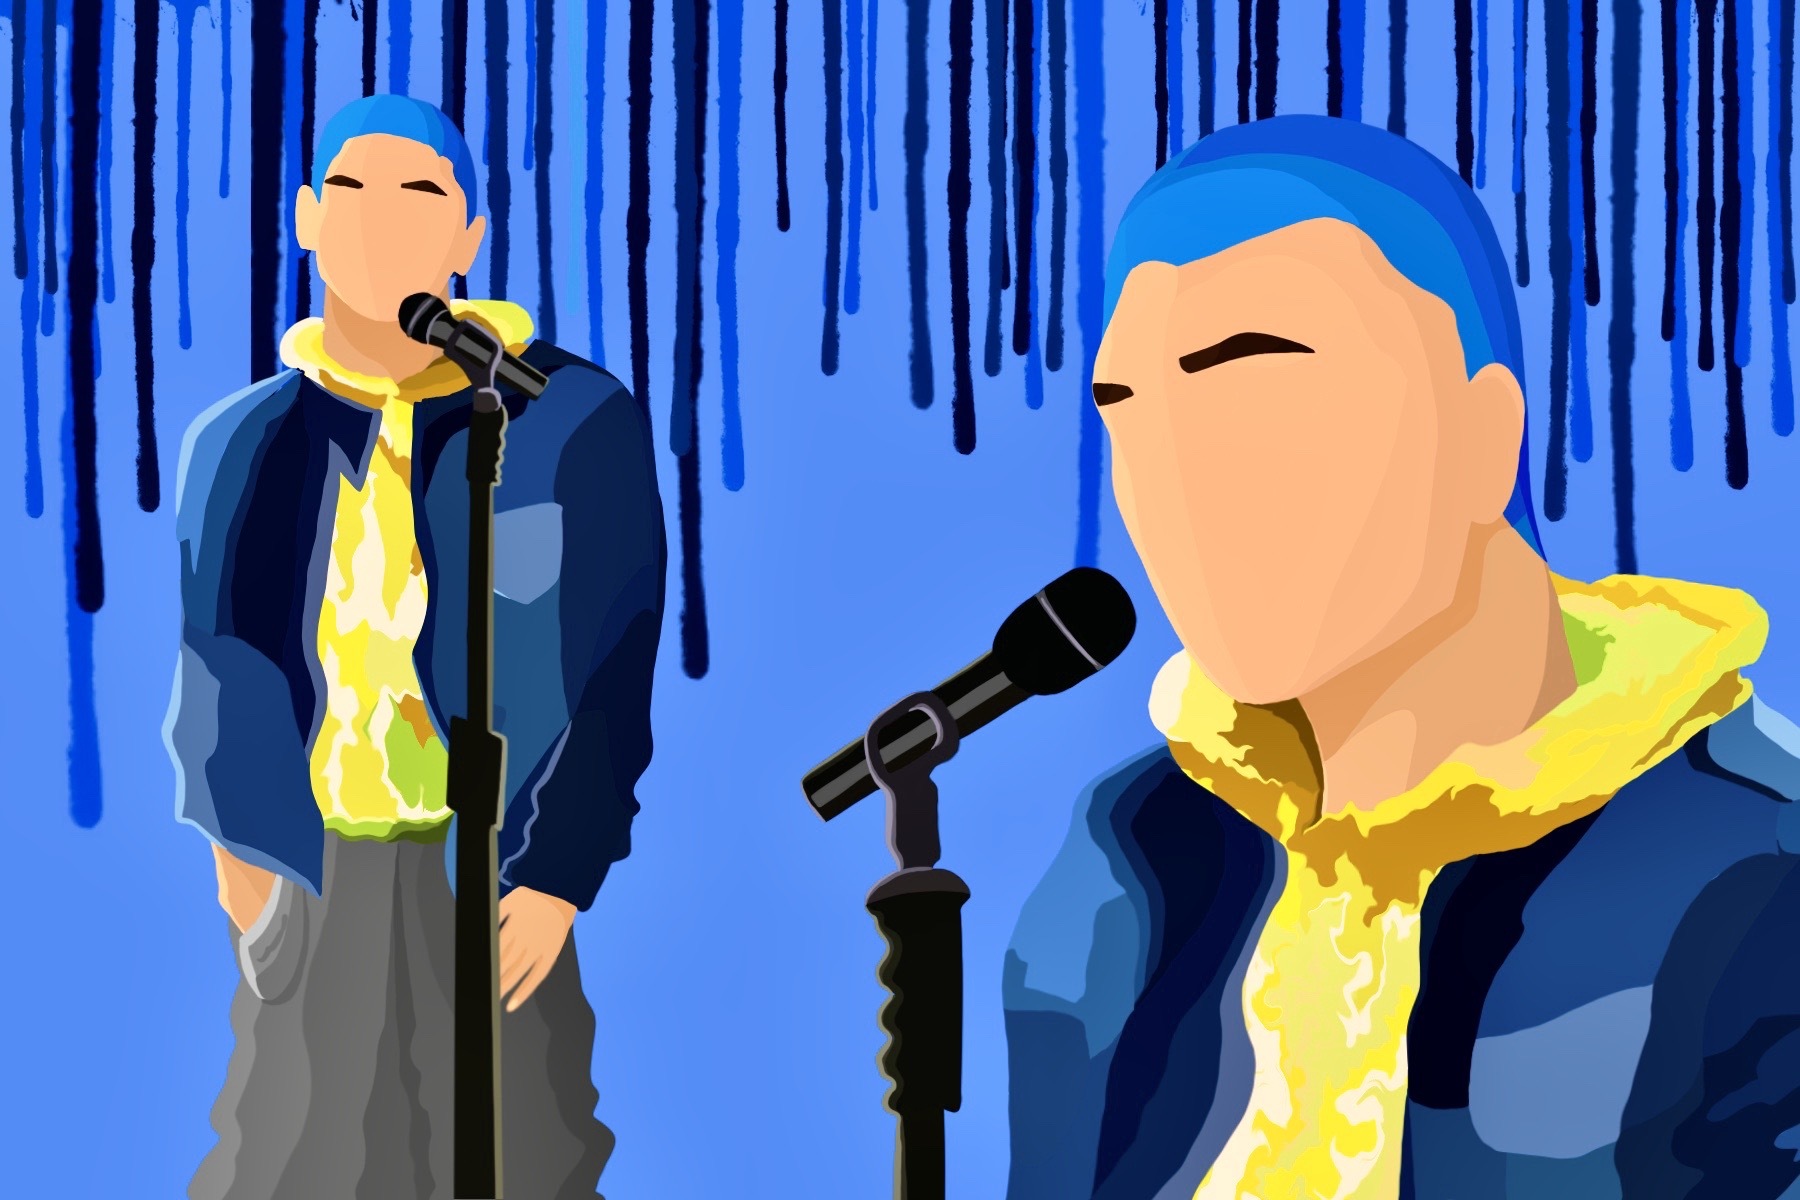 Lauv sings while using the color blue and yellow to represent the emotions of his performance.